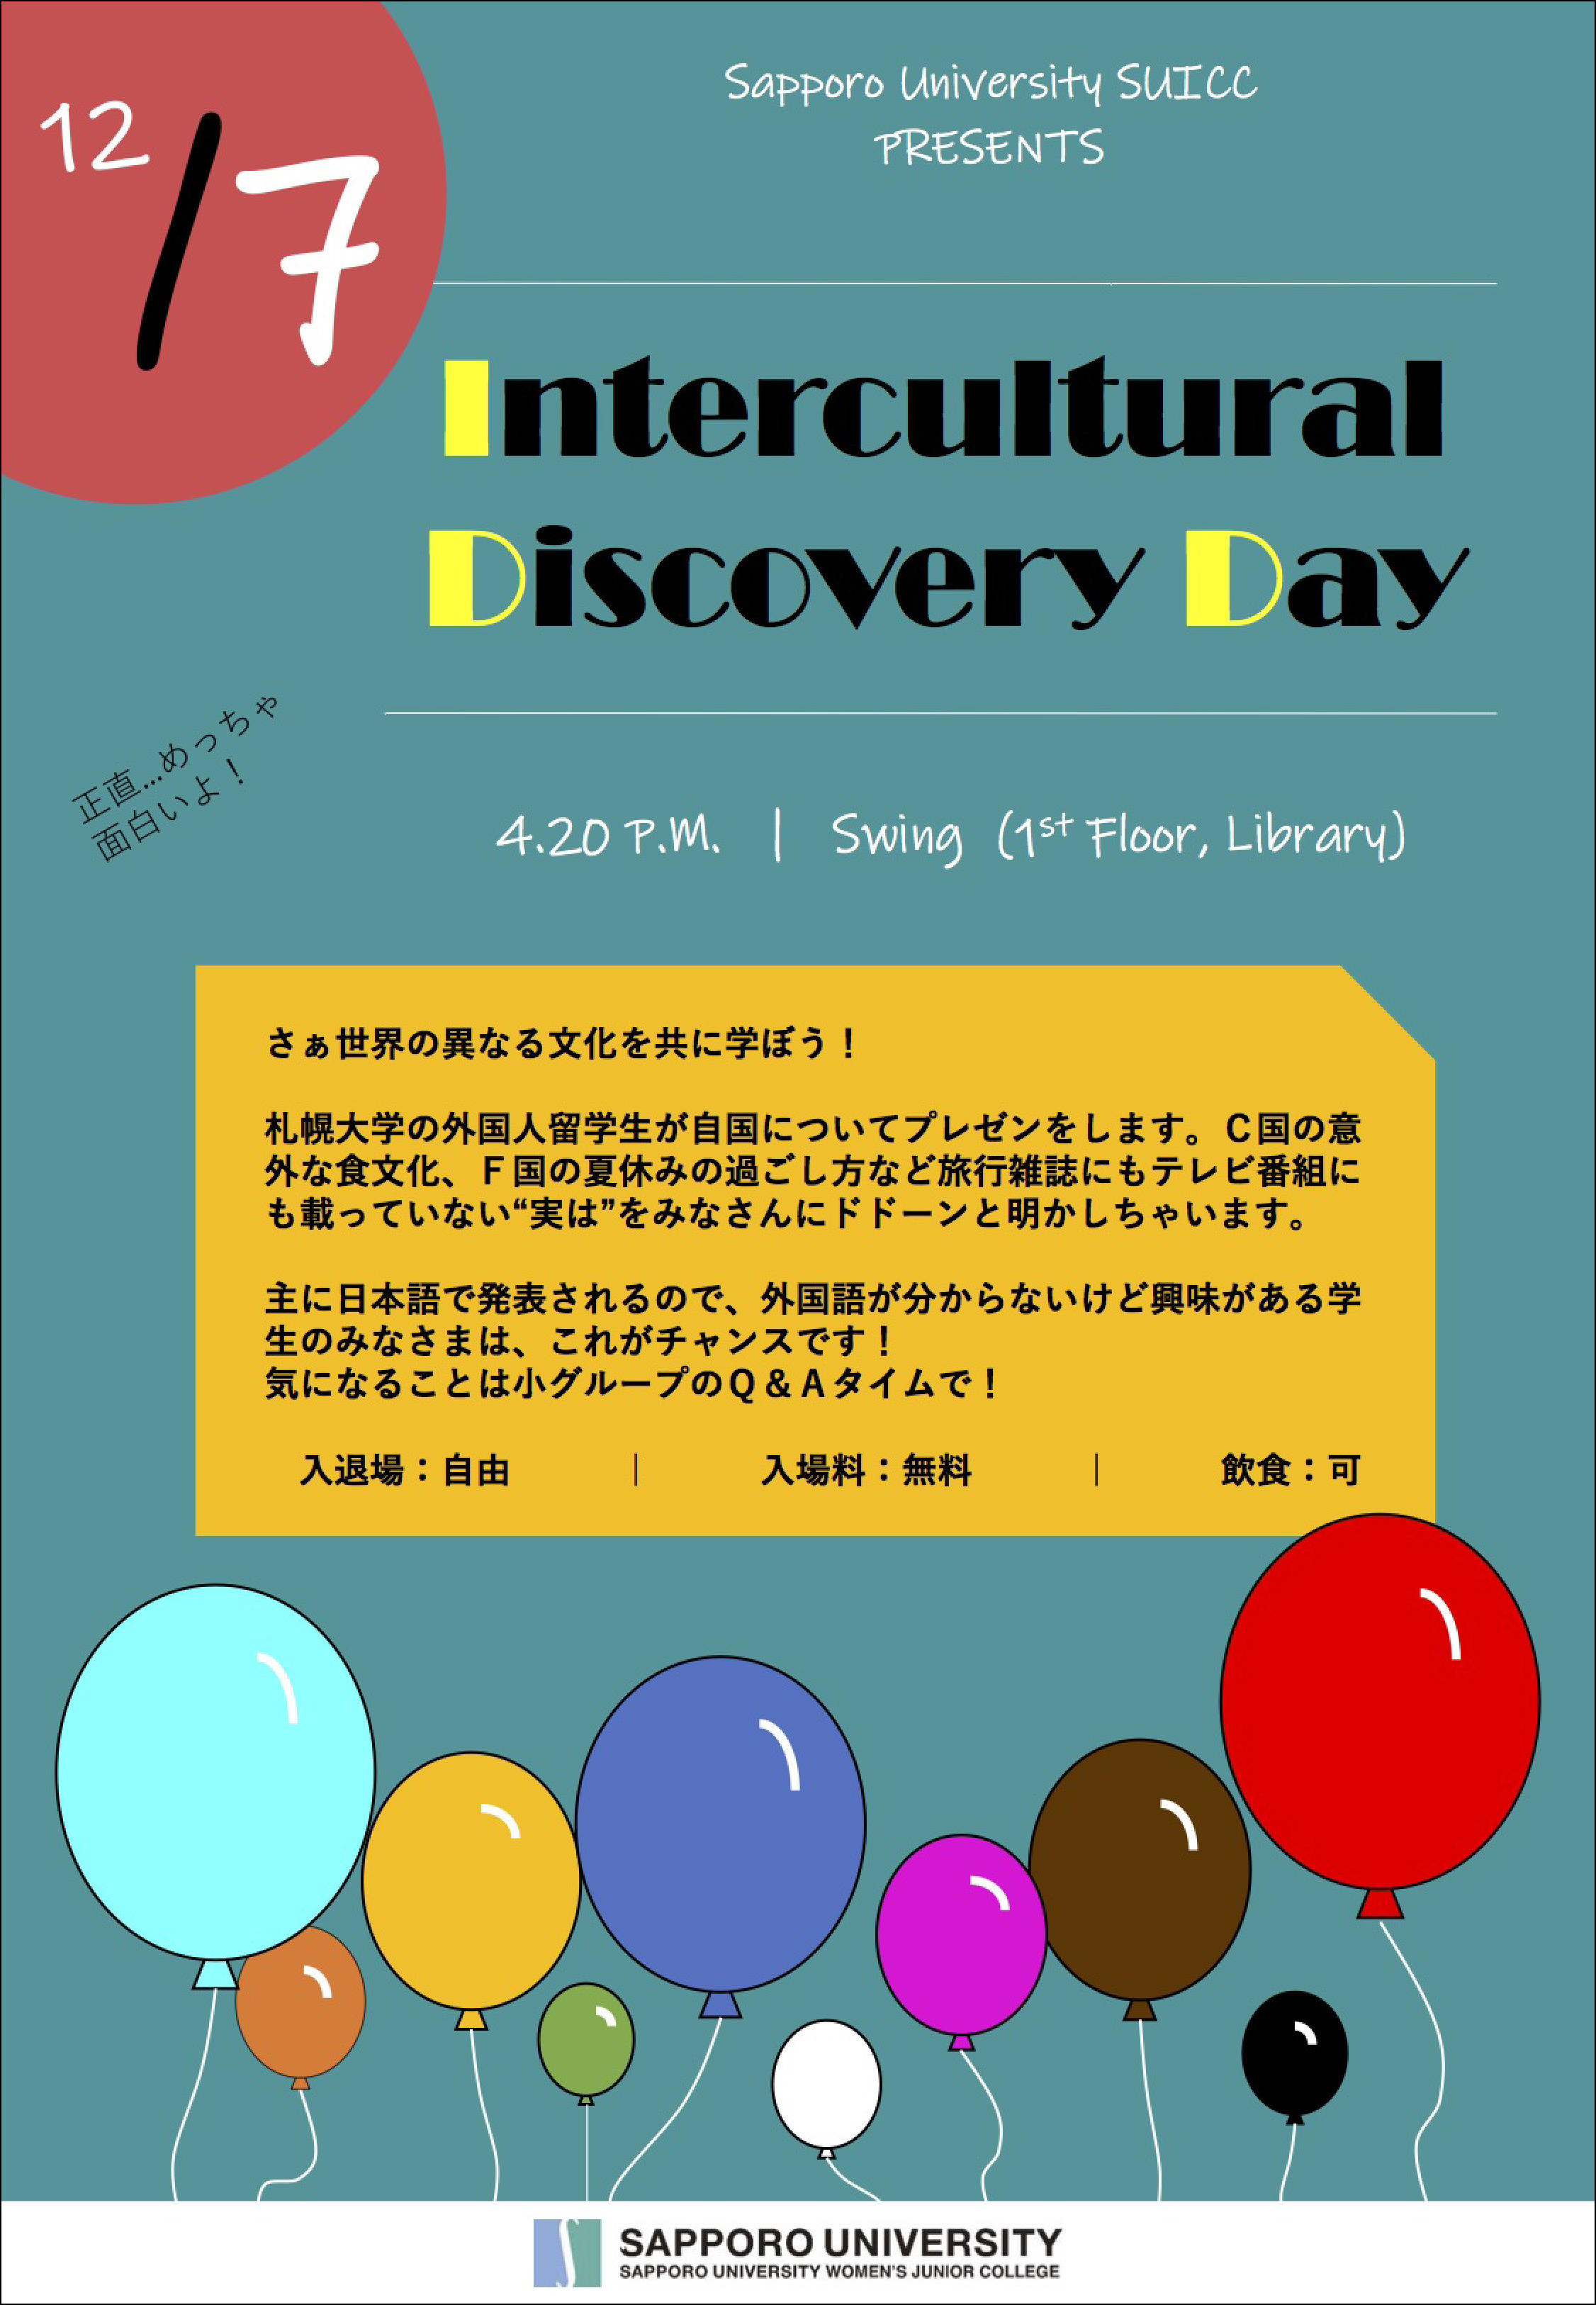 Intercultural Discovery Day